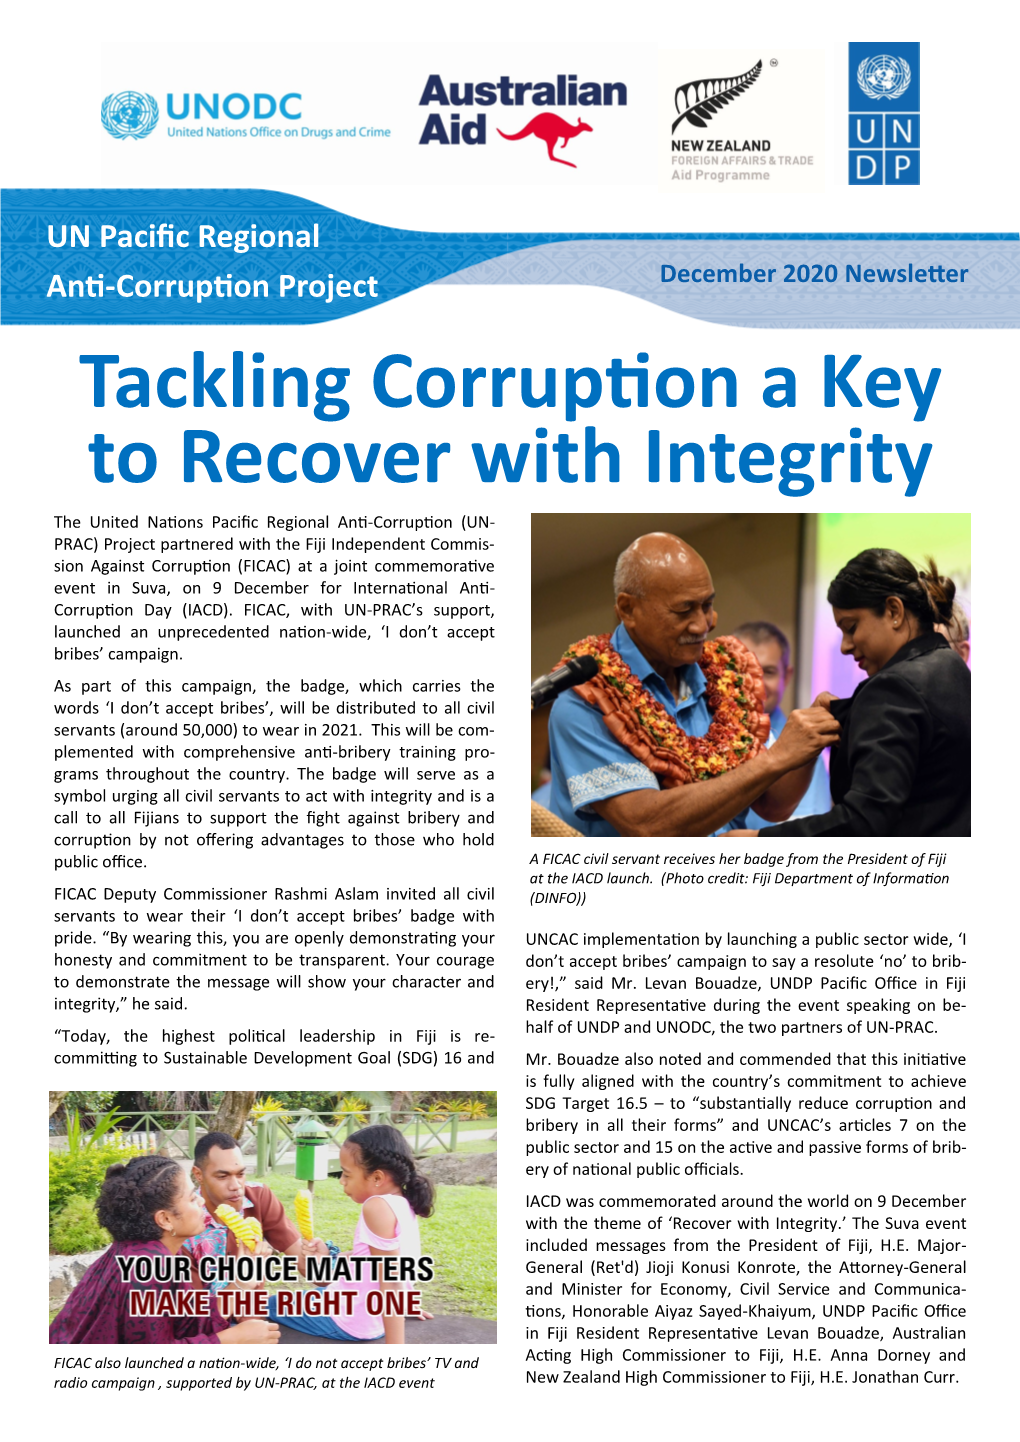 Tackling Corruption a Key to Recover with Integrity